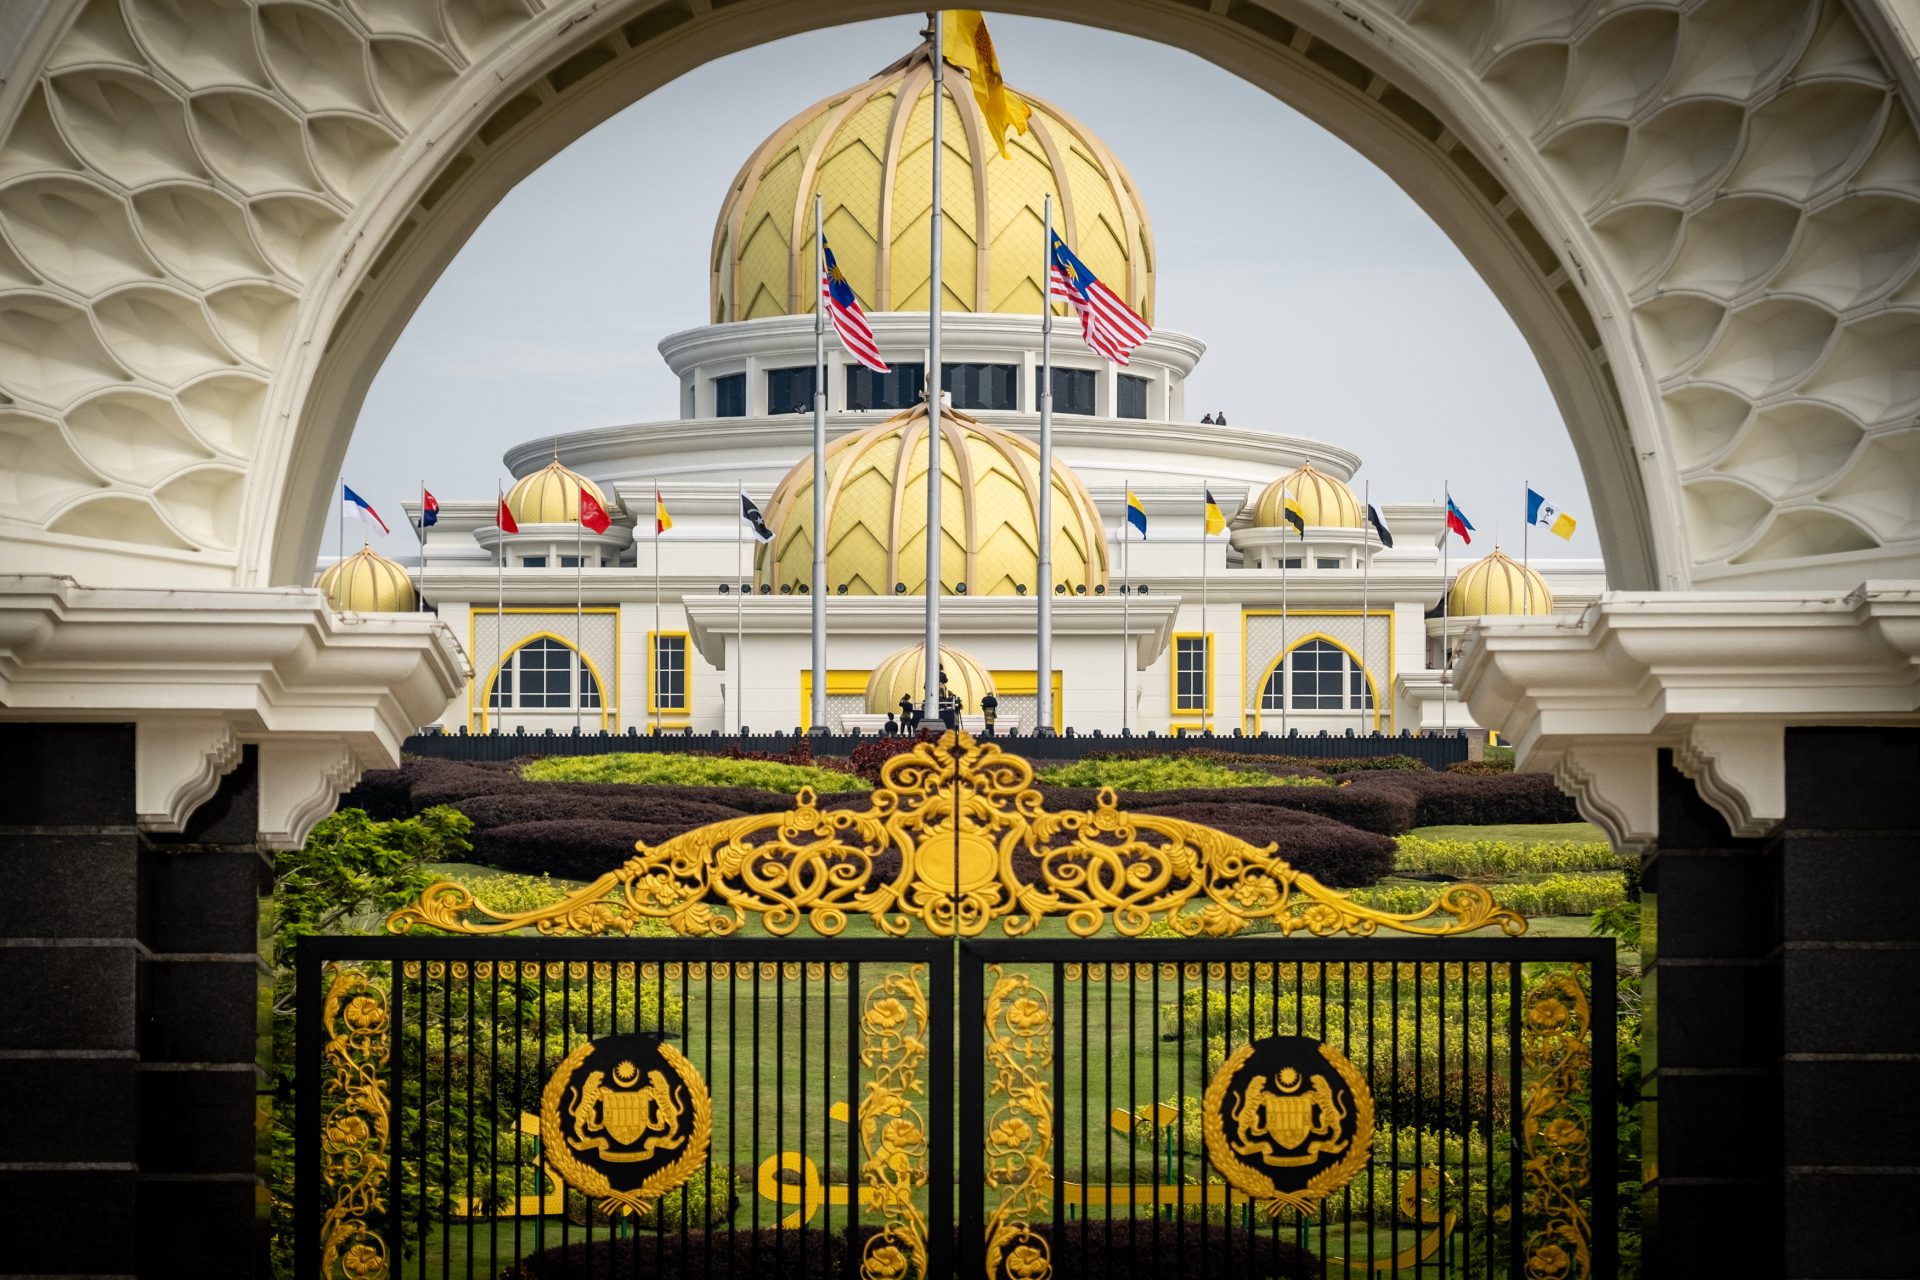 Becoming overall Sultan of Malaysia